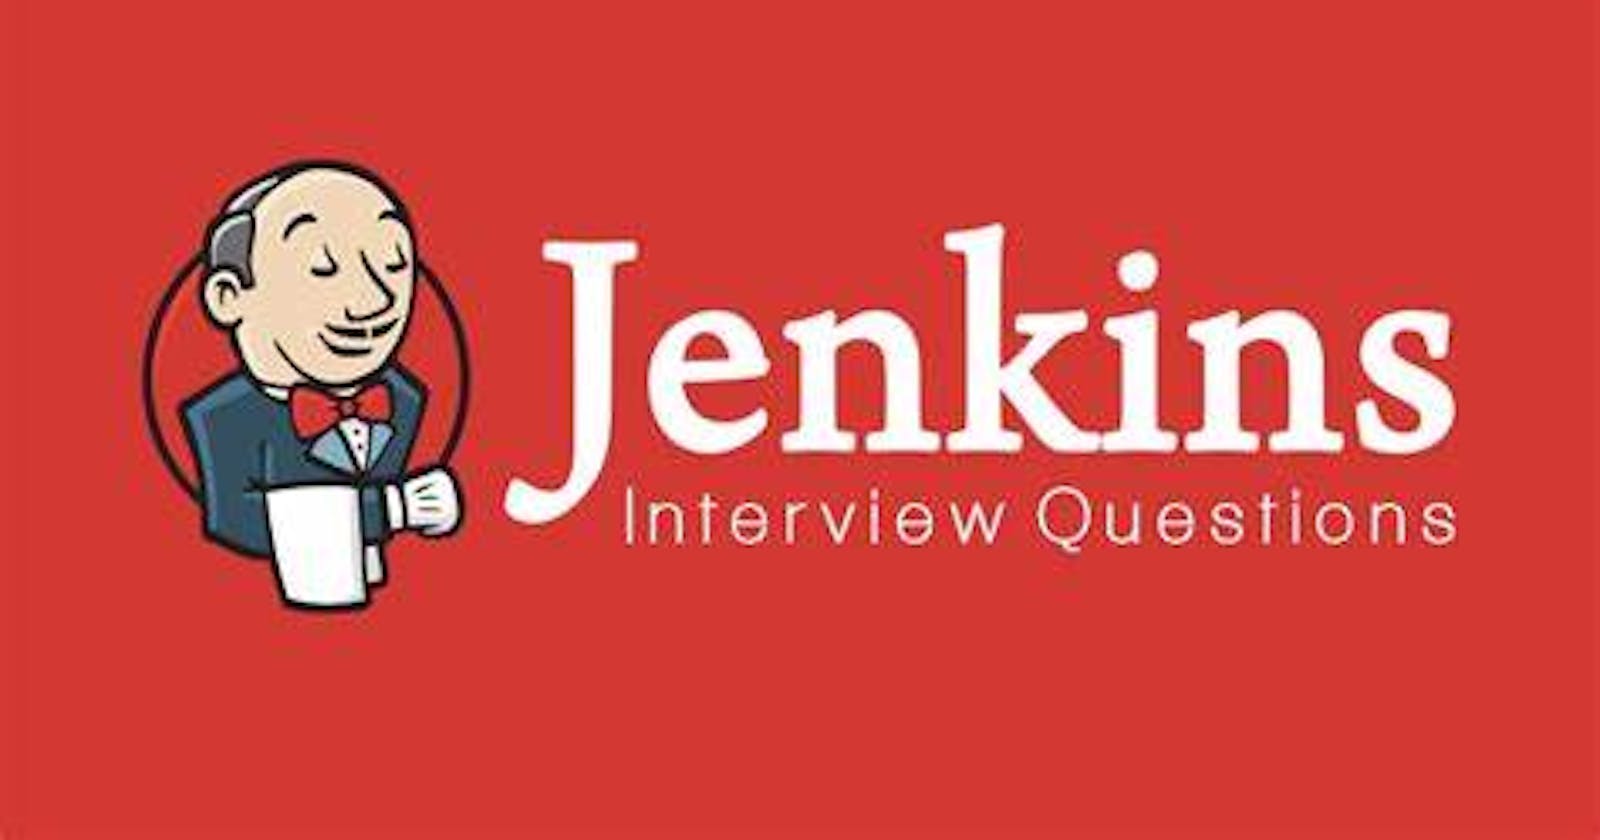 Jenkins Important Interview Questions.